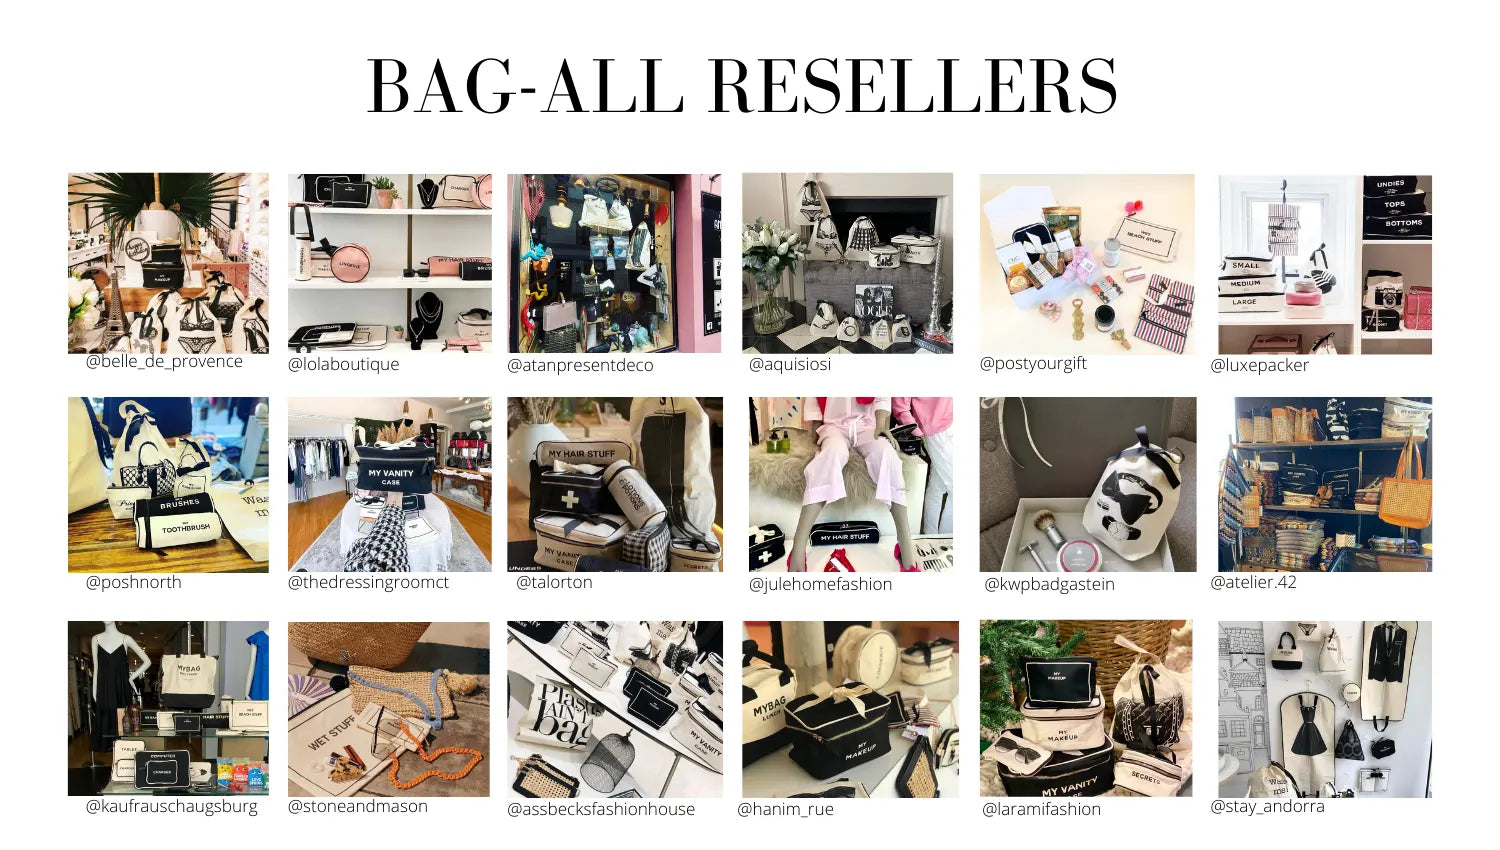 BAG-ALL RESELLERS